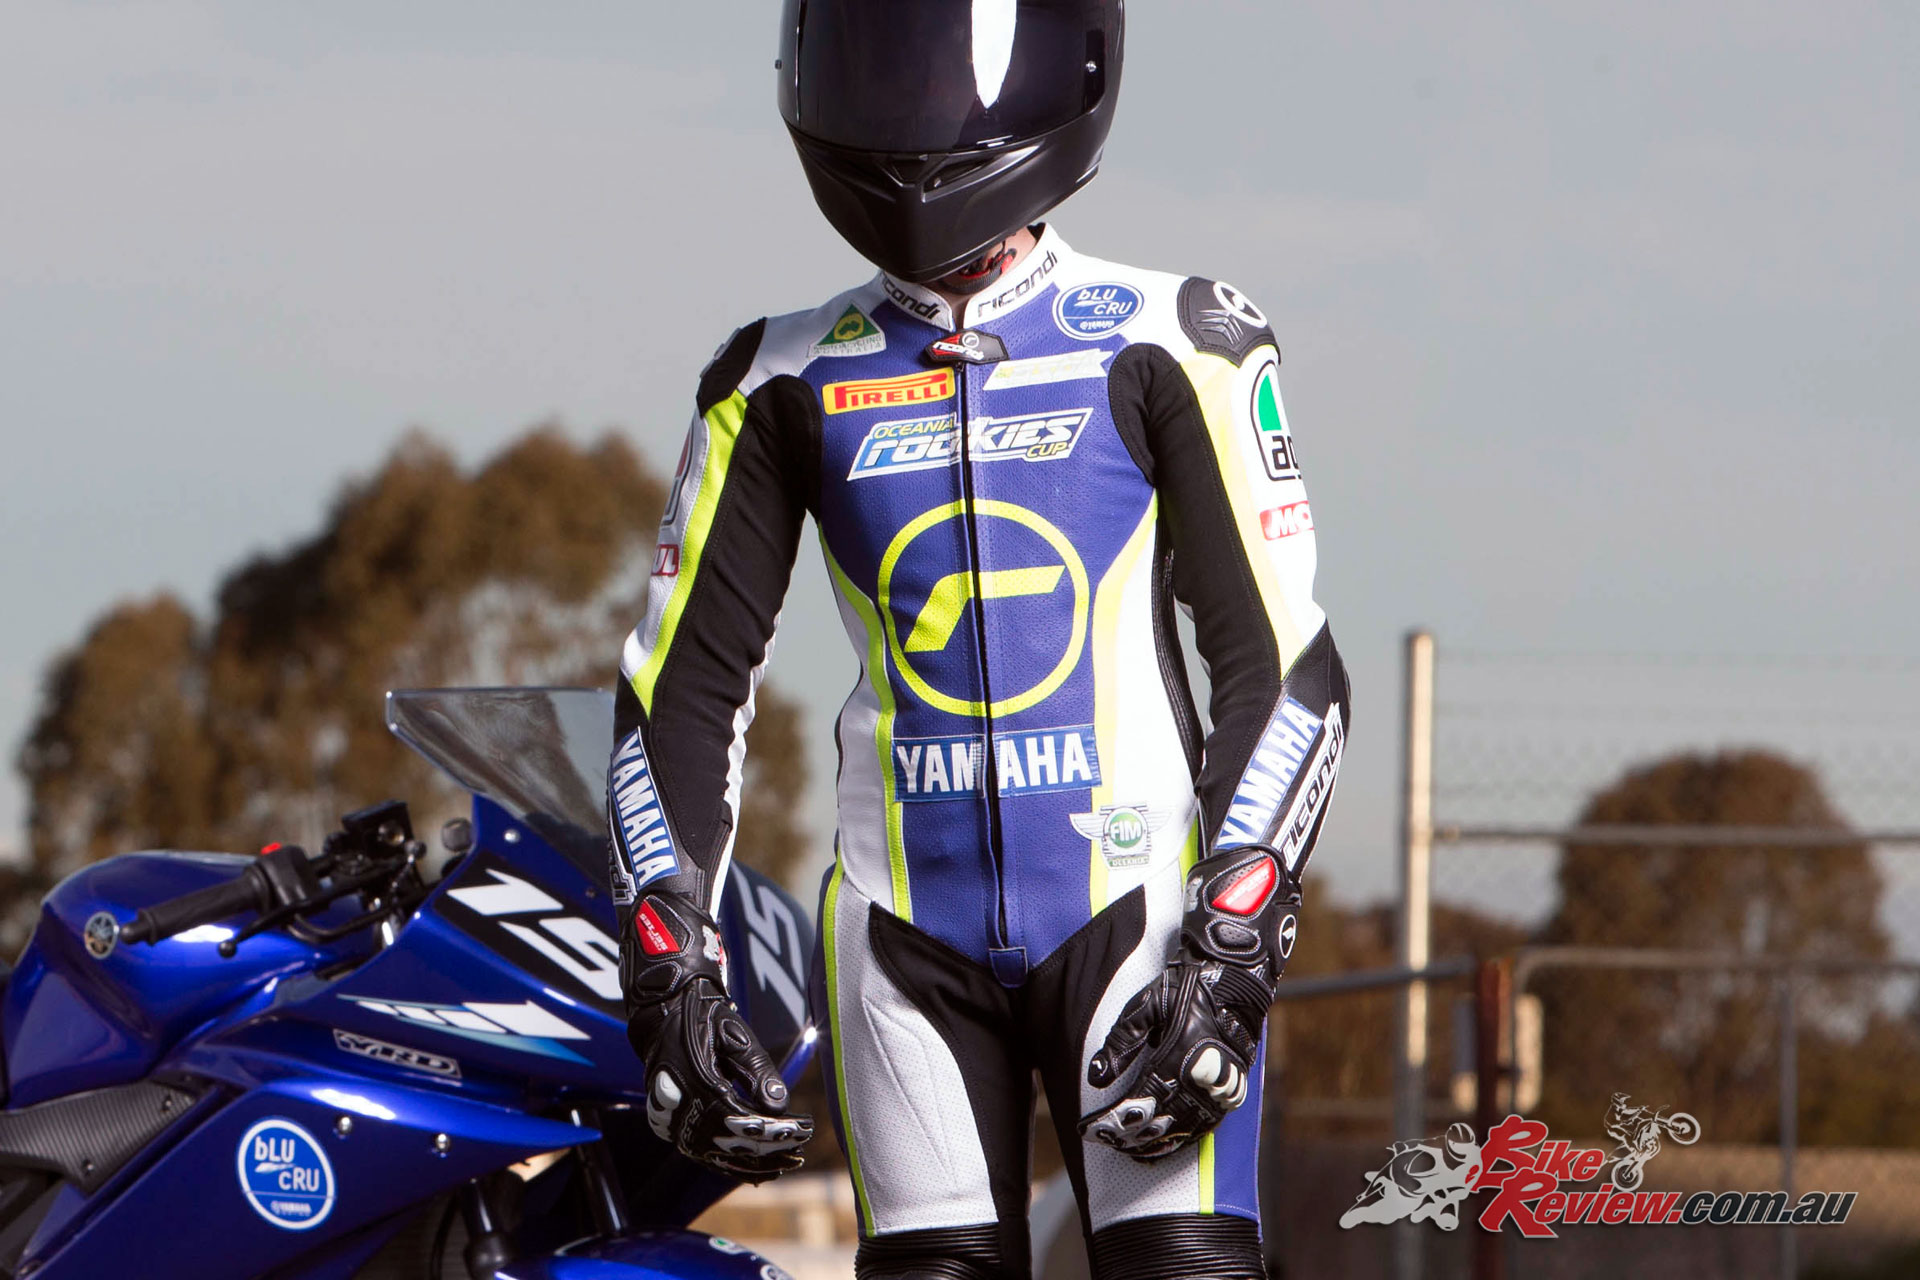 Ricondi will be providing the bLU cRU Oceania Rookies Cup with custom leathers and gloves, as well as repair services in 2019